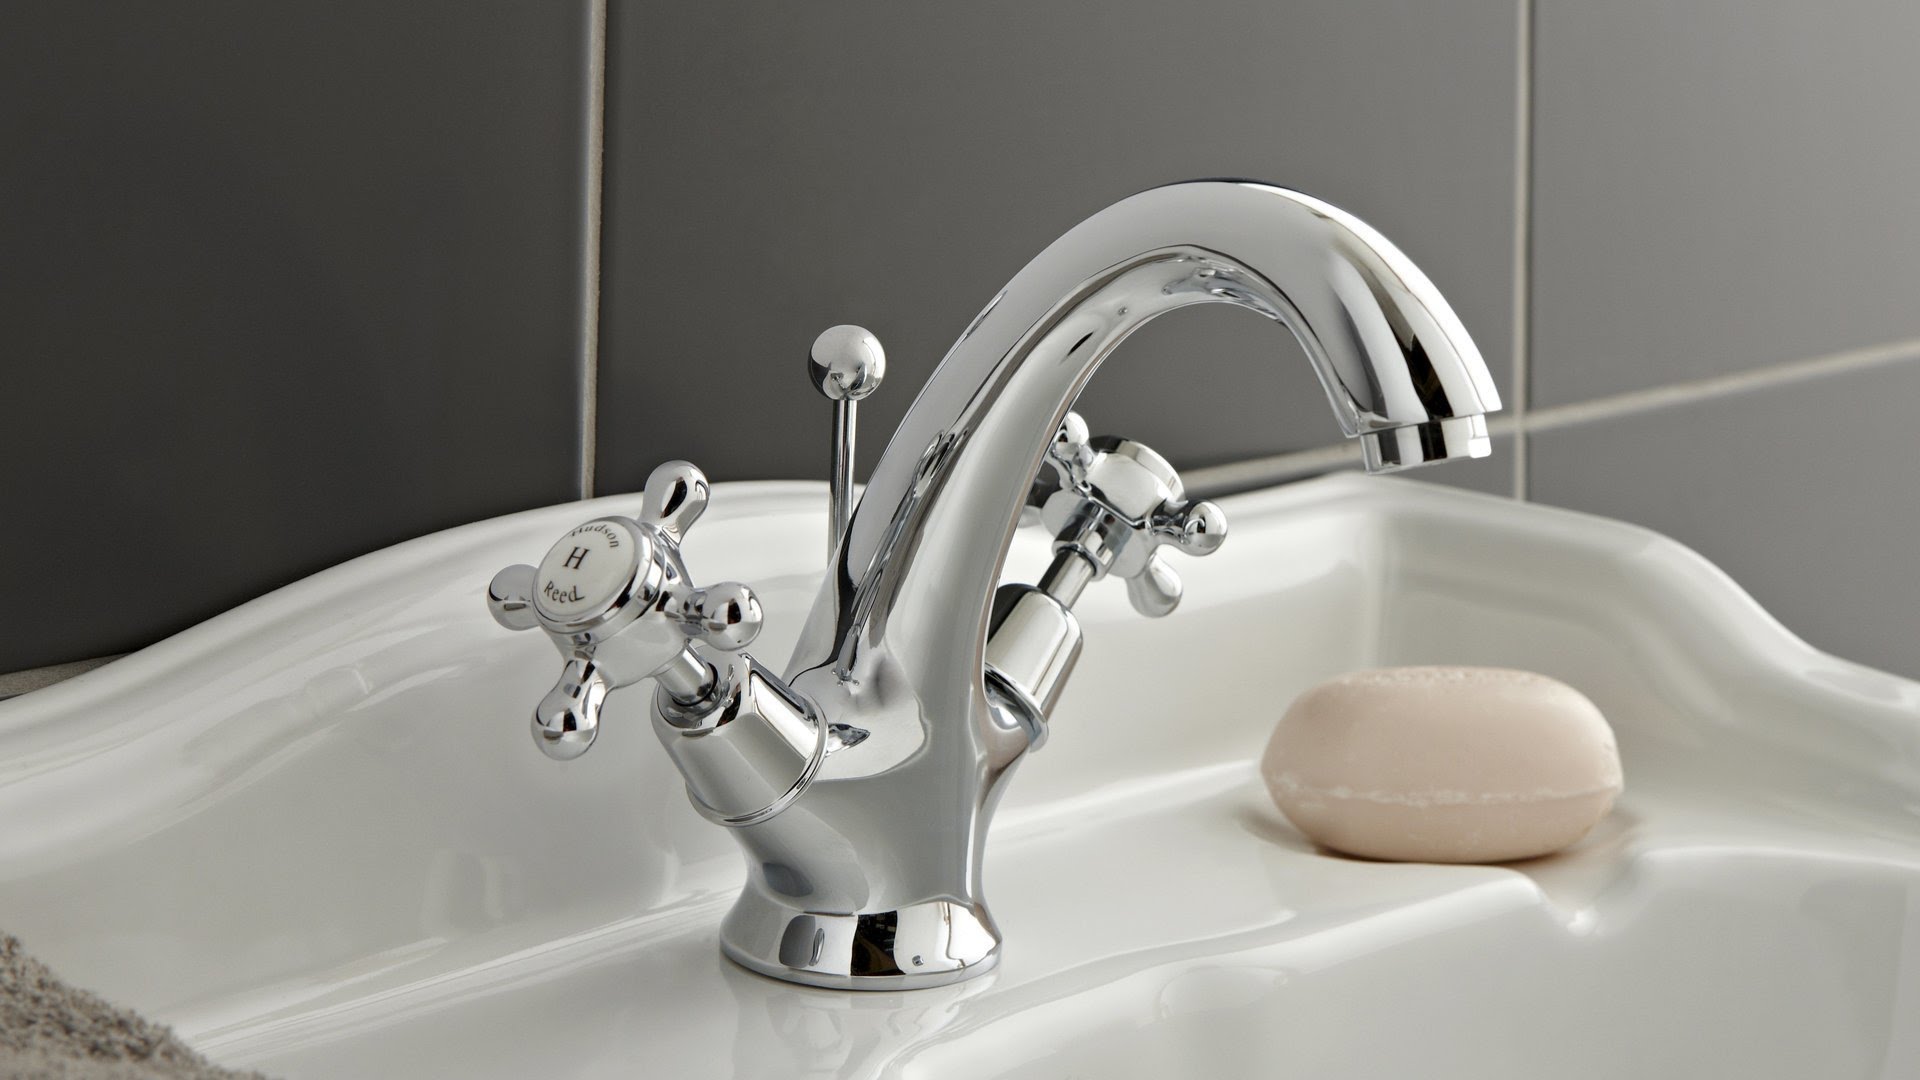 What Type of Bathroom Faucets Are Popular